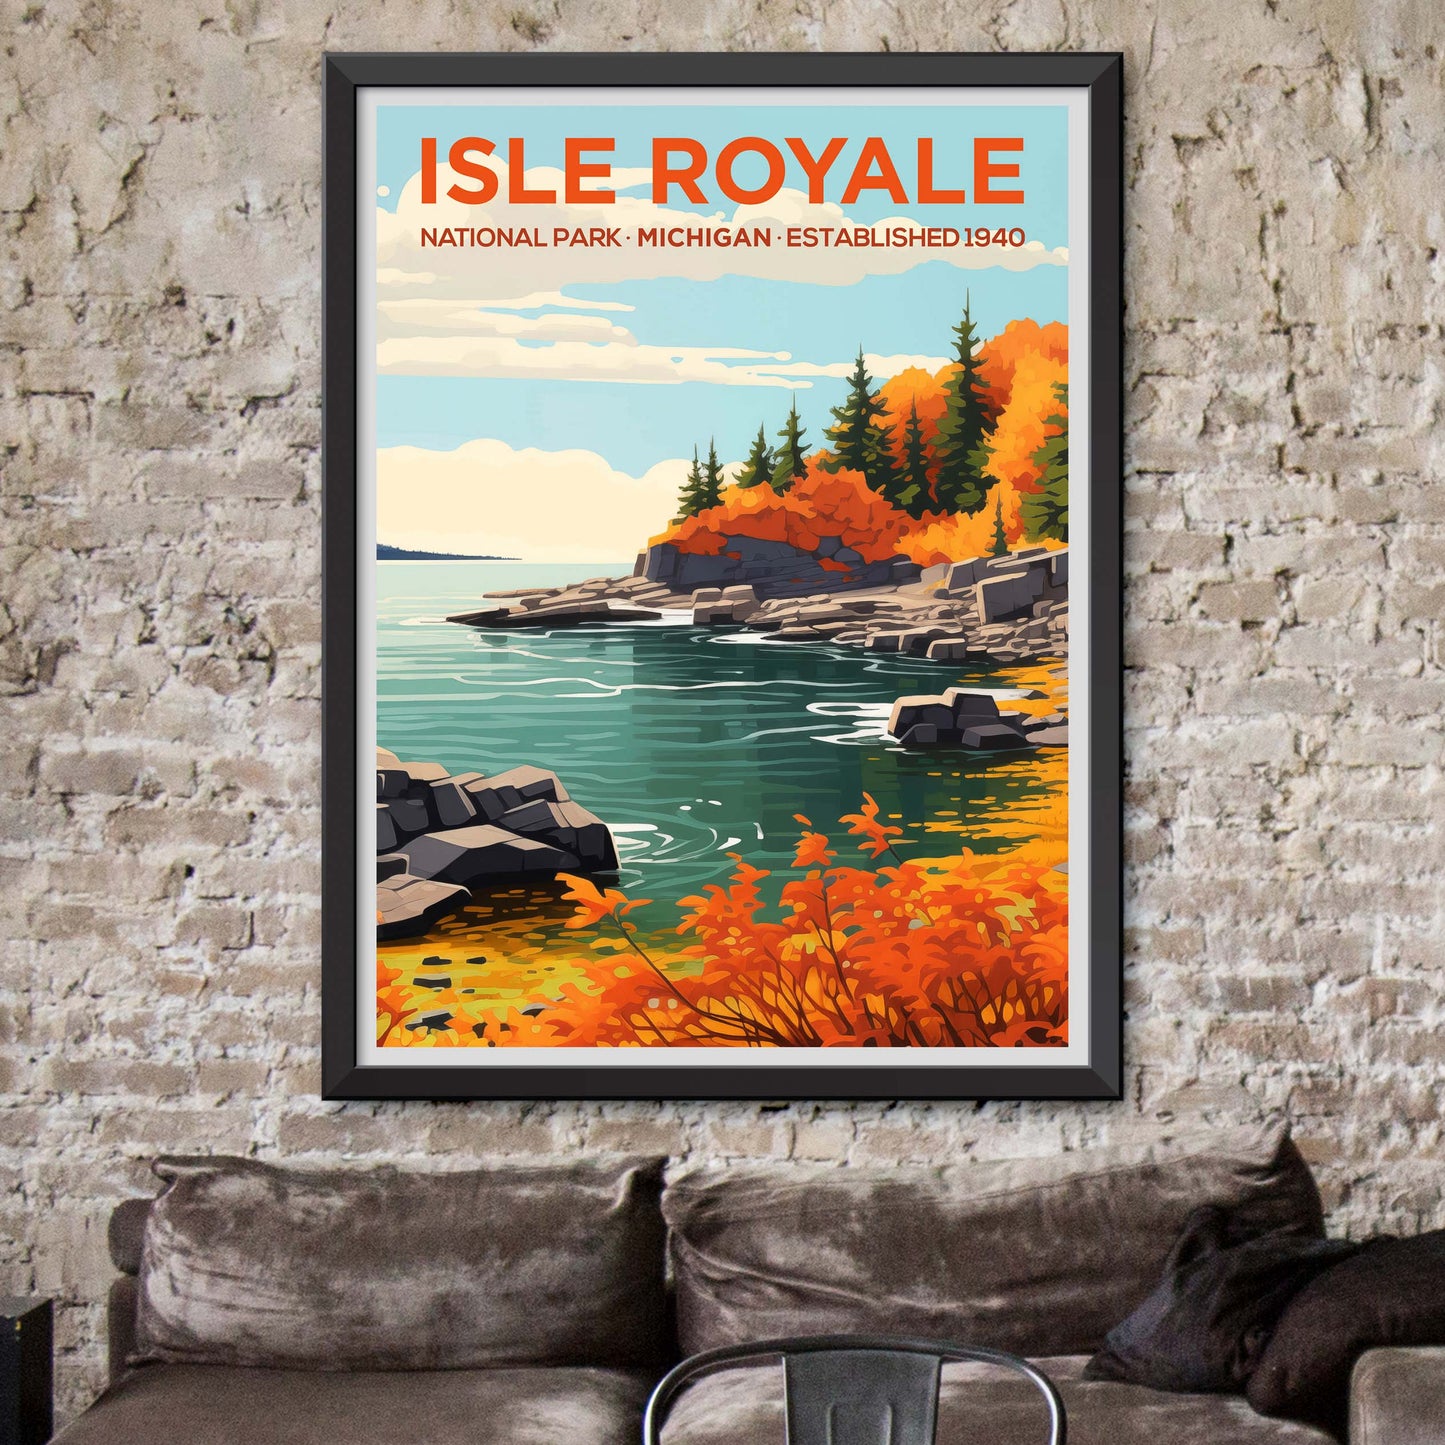 Isle Royale National Park Travel Poster with Vibrant Colors